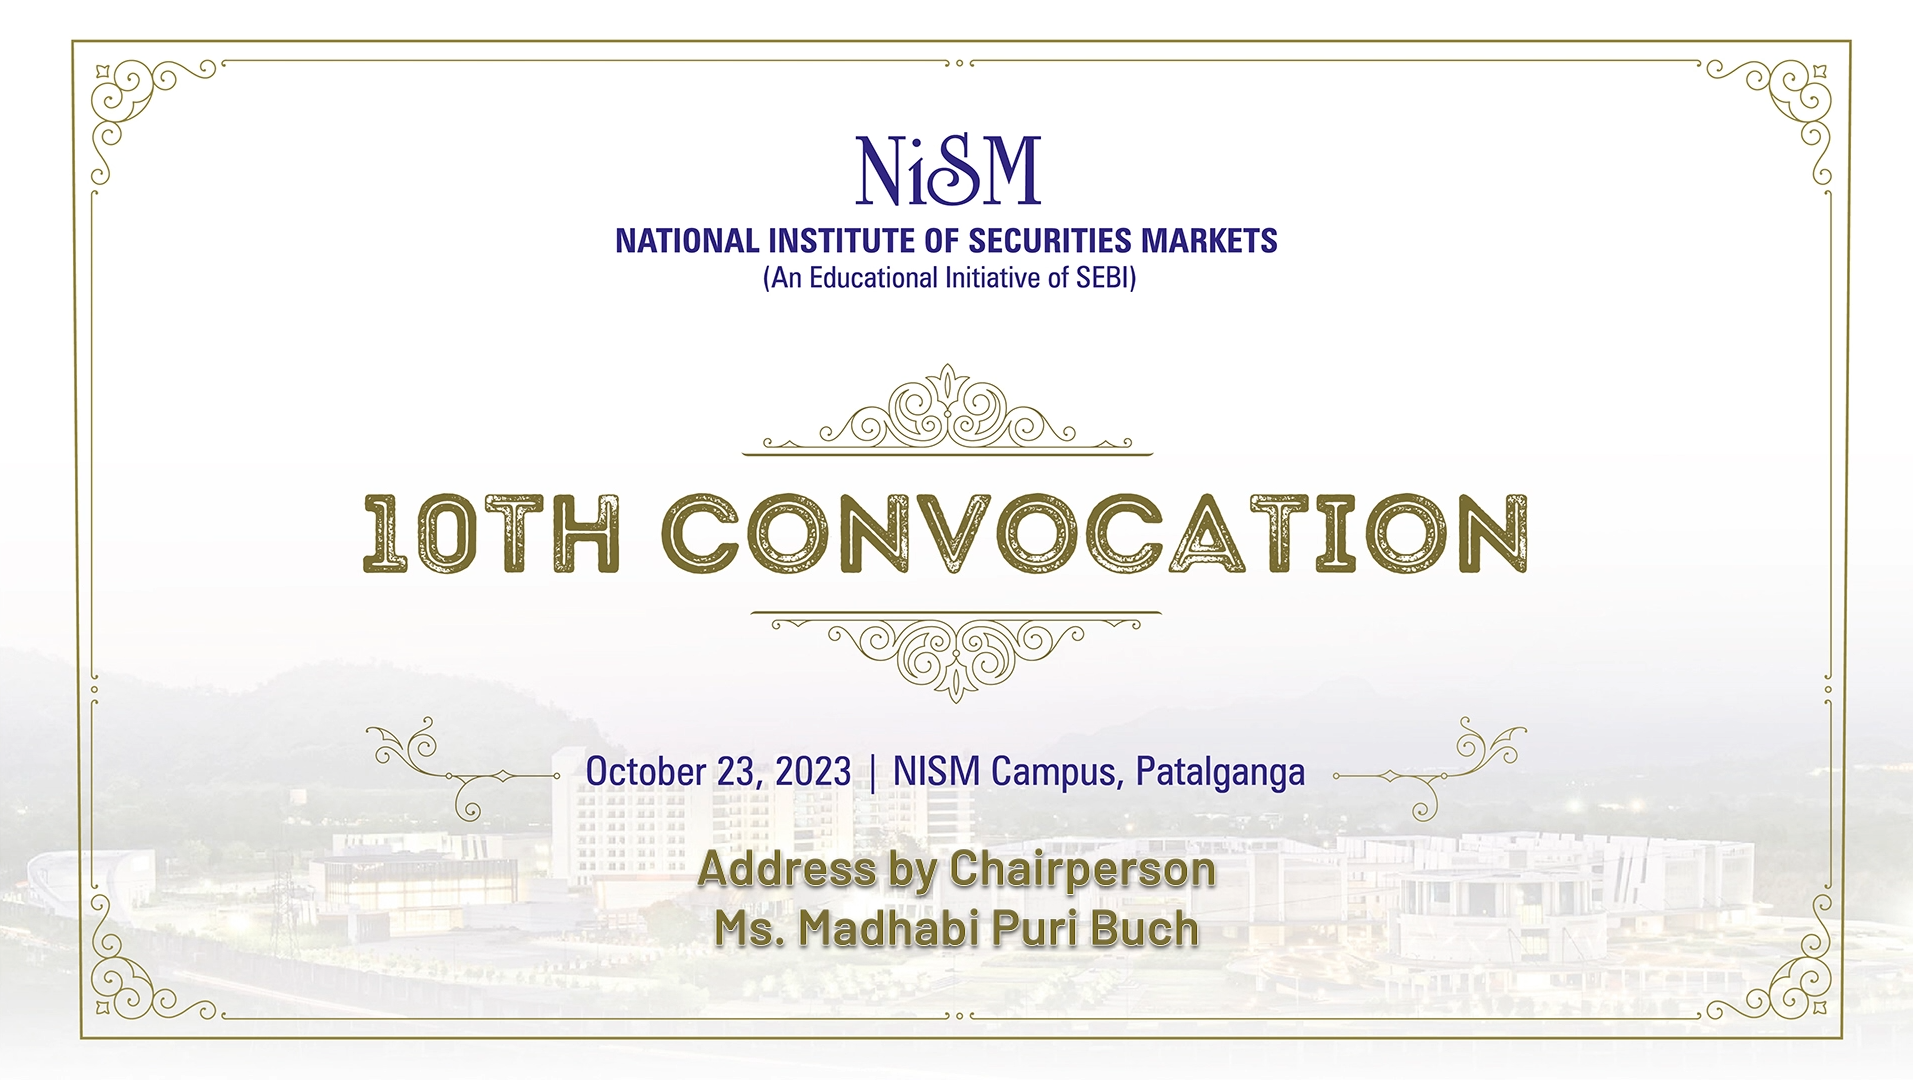 Address by Chairperson Ms Madhabi Puri Buch during the 10th Convocation Ceremony at the NISM Campus